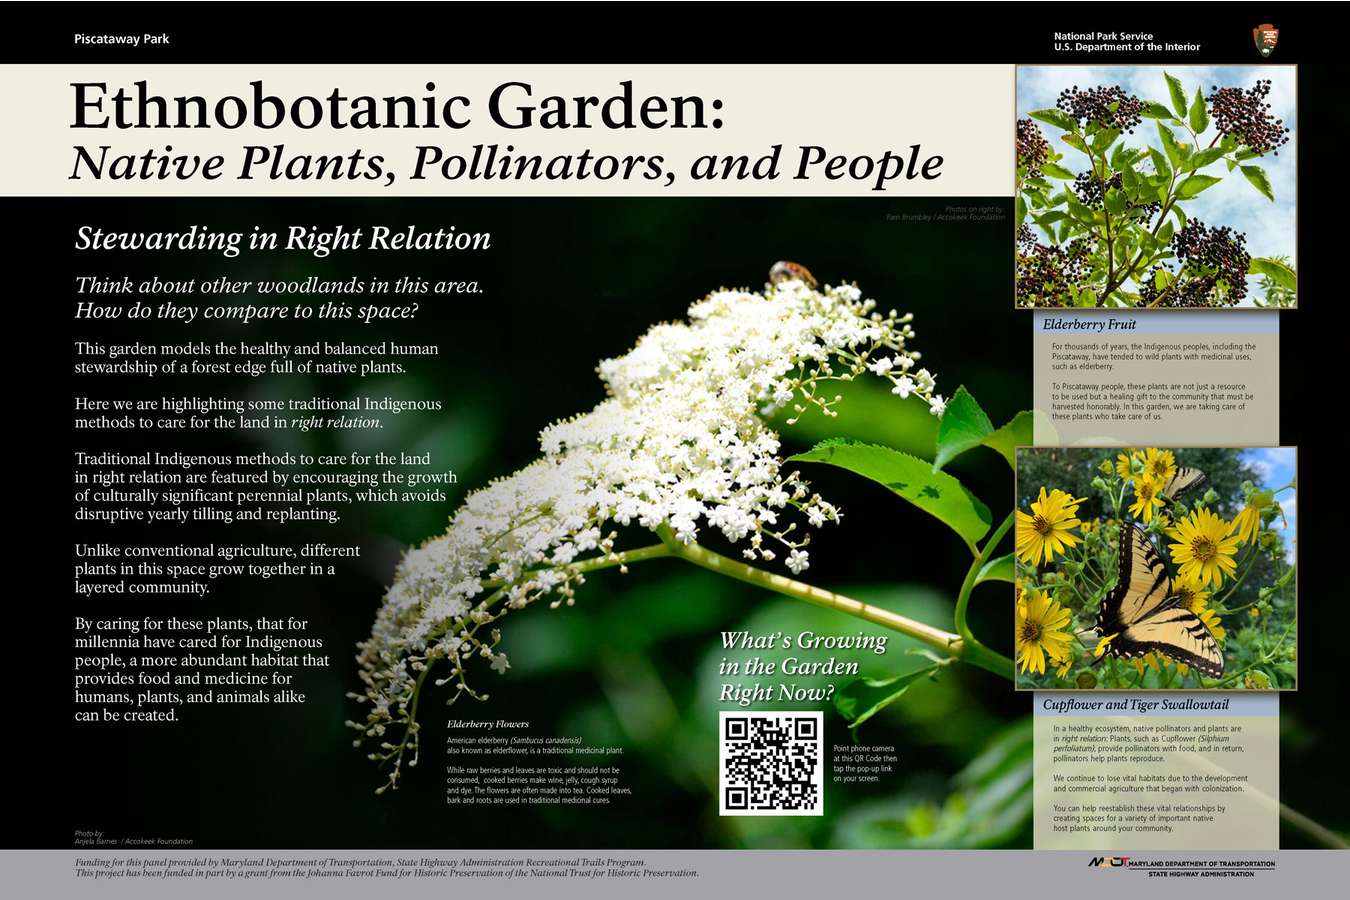 4 Garden : This garden in Piscataway Park cultivates native plants for traditional use.